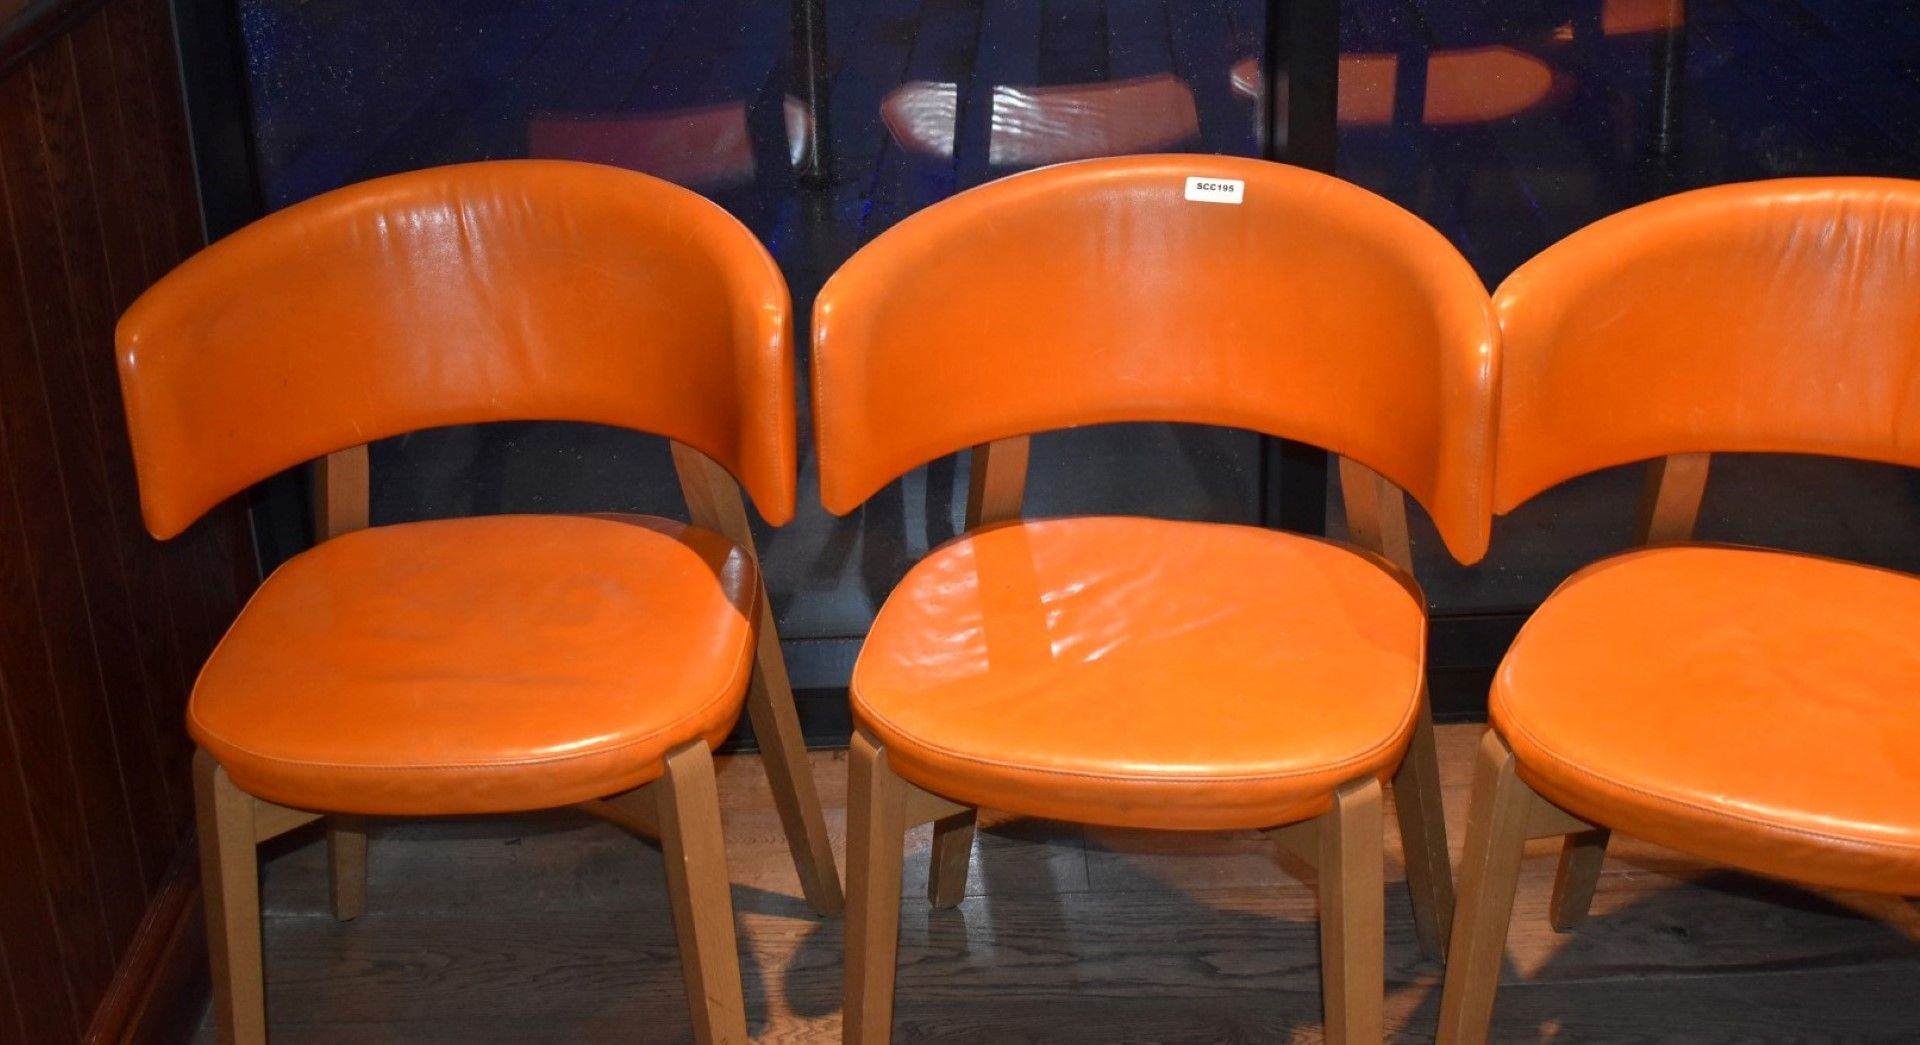 4 x Contemporary Dining Chairs With Beech Frames and Orange Leather Seat Pads and Back Rests - Image 2 of 4